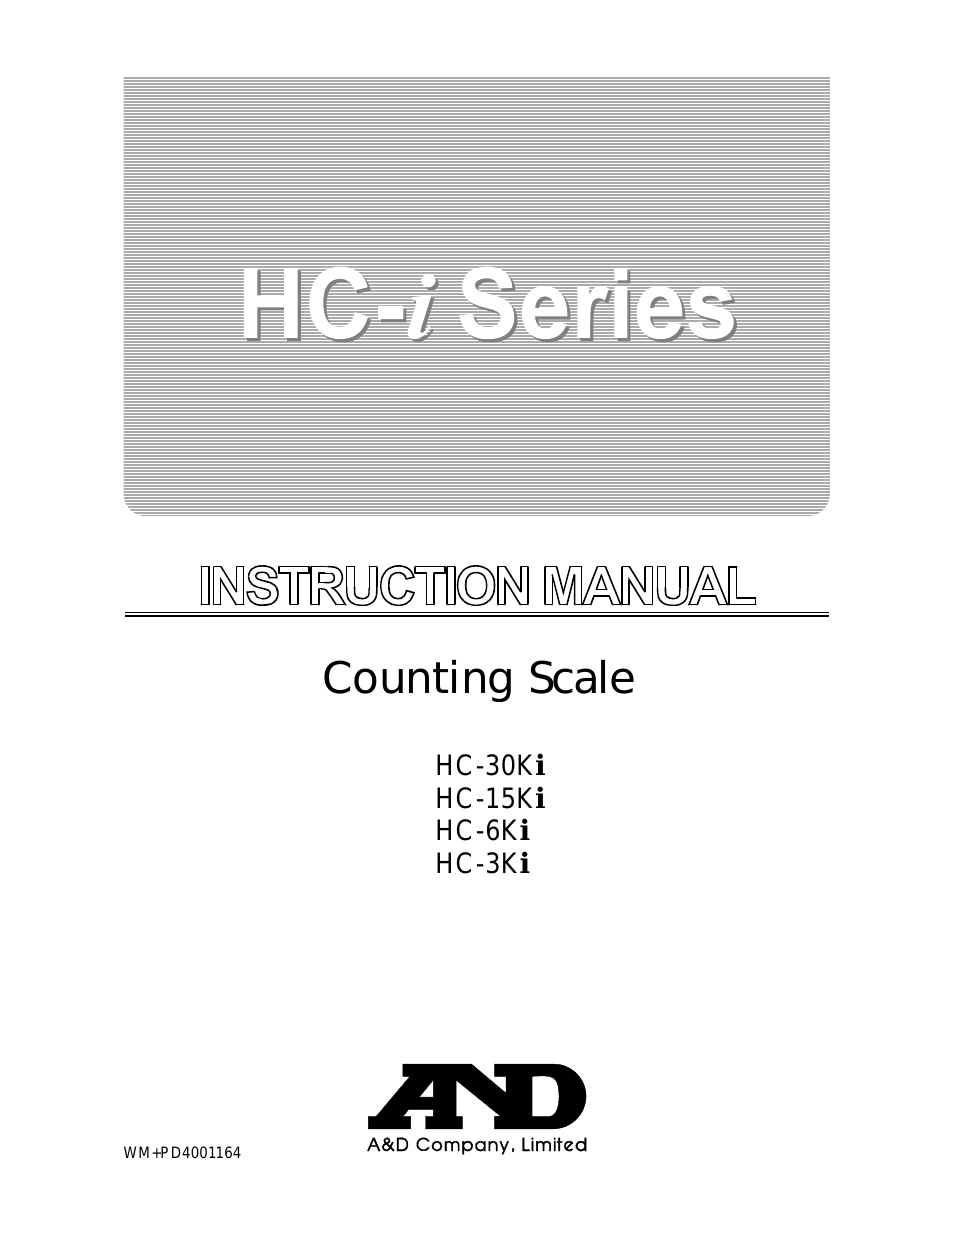 Counting Scale HC-6Ki (Page 1)